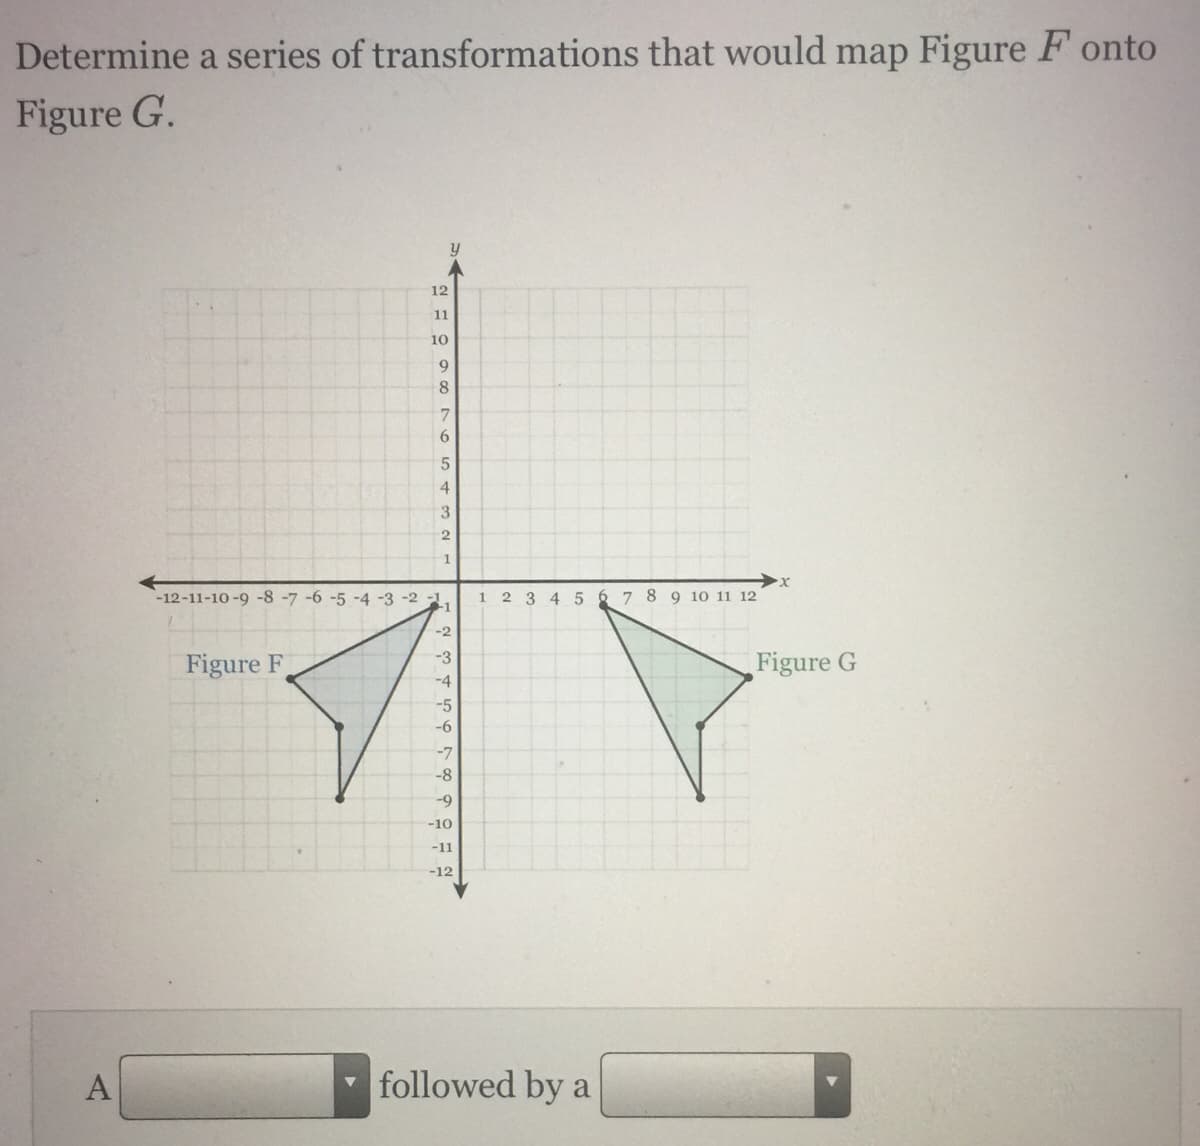 Determine a series of transformations that would map Figure F onto
Figure G.
12
11
10
9
8.
3
-12-11-10-9 -8 -7 -6 -5 -4 -3 -2 -1.
-1
2 3 4 5
6 7 8 9 10 11 12
1.
-2
-3
Figure F
Figure G
-4
-5
-6
-7
-8
-9
-10
-11
-12
A
followed by a
